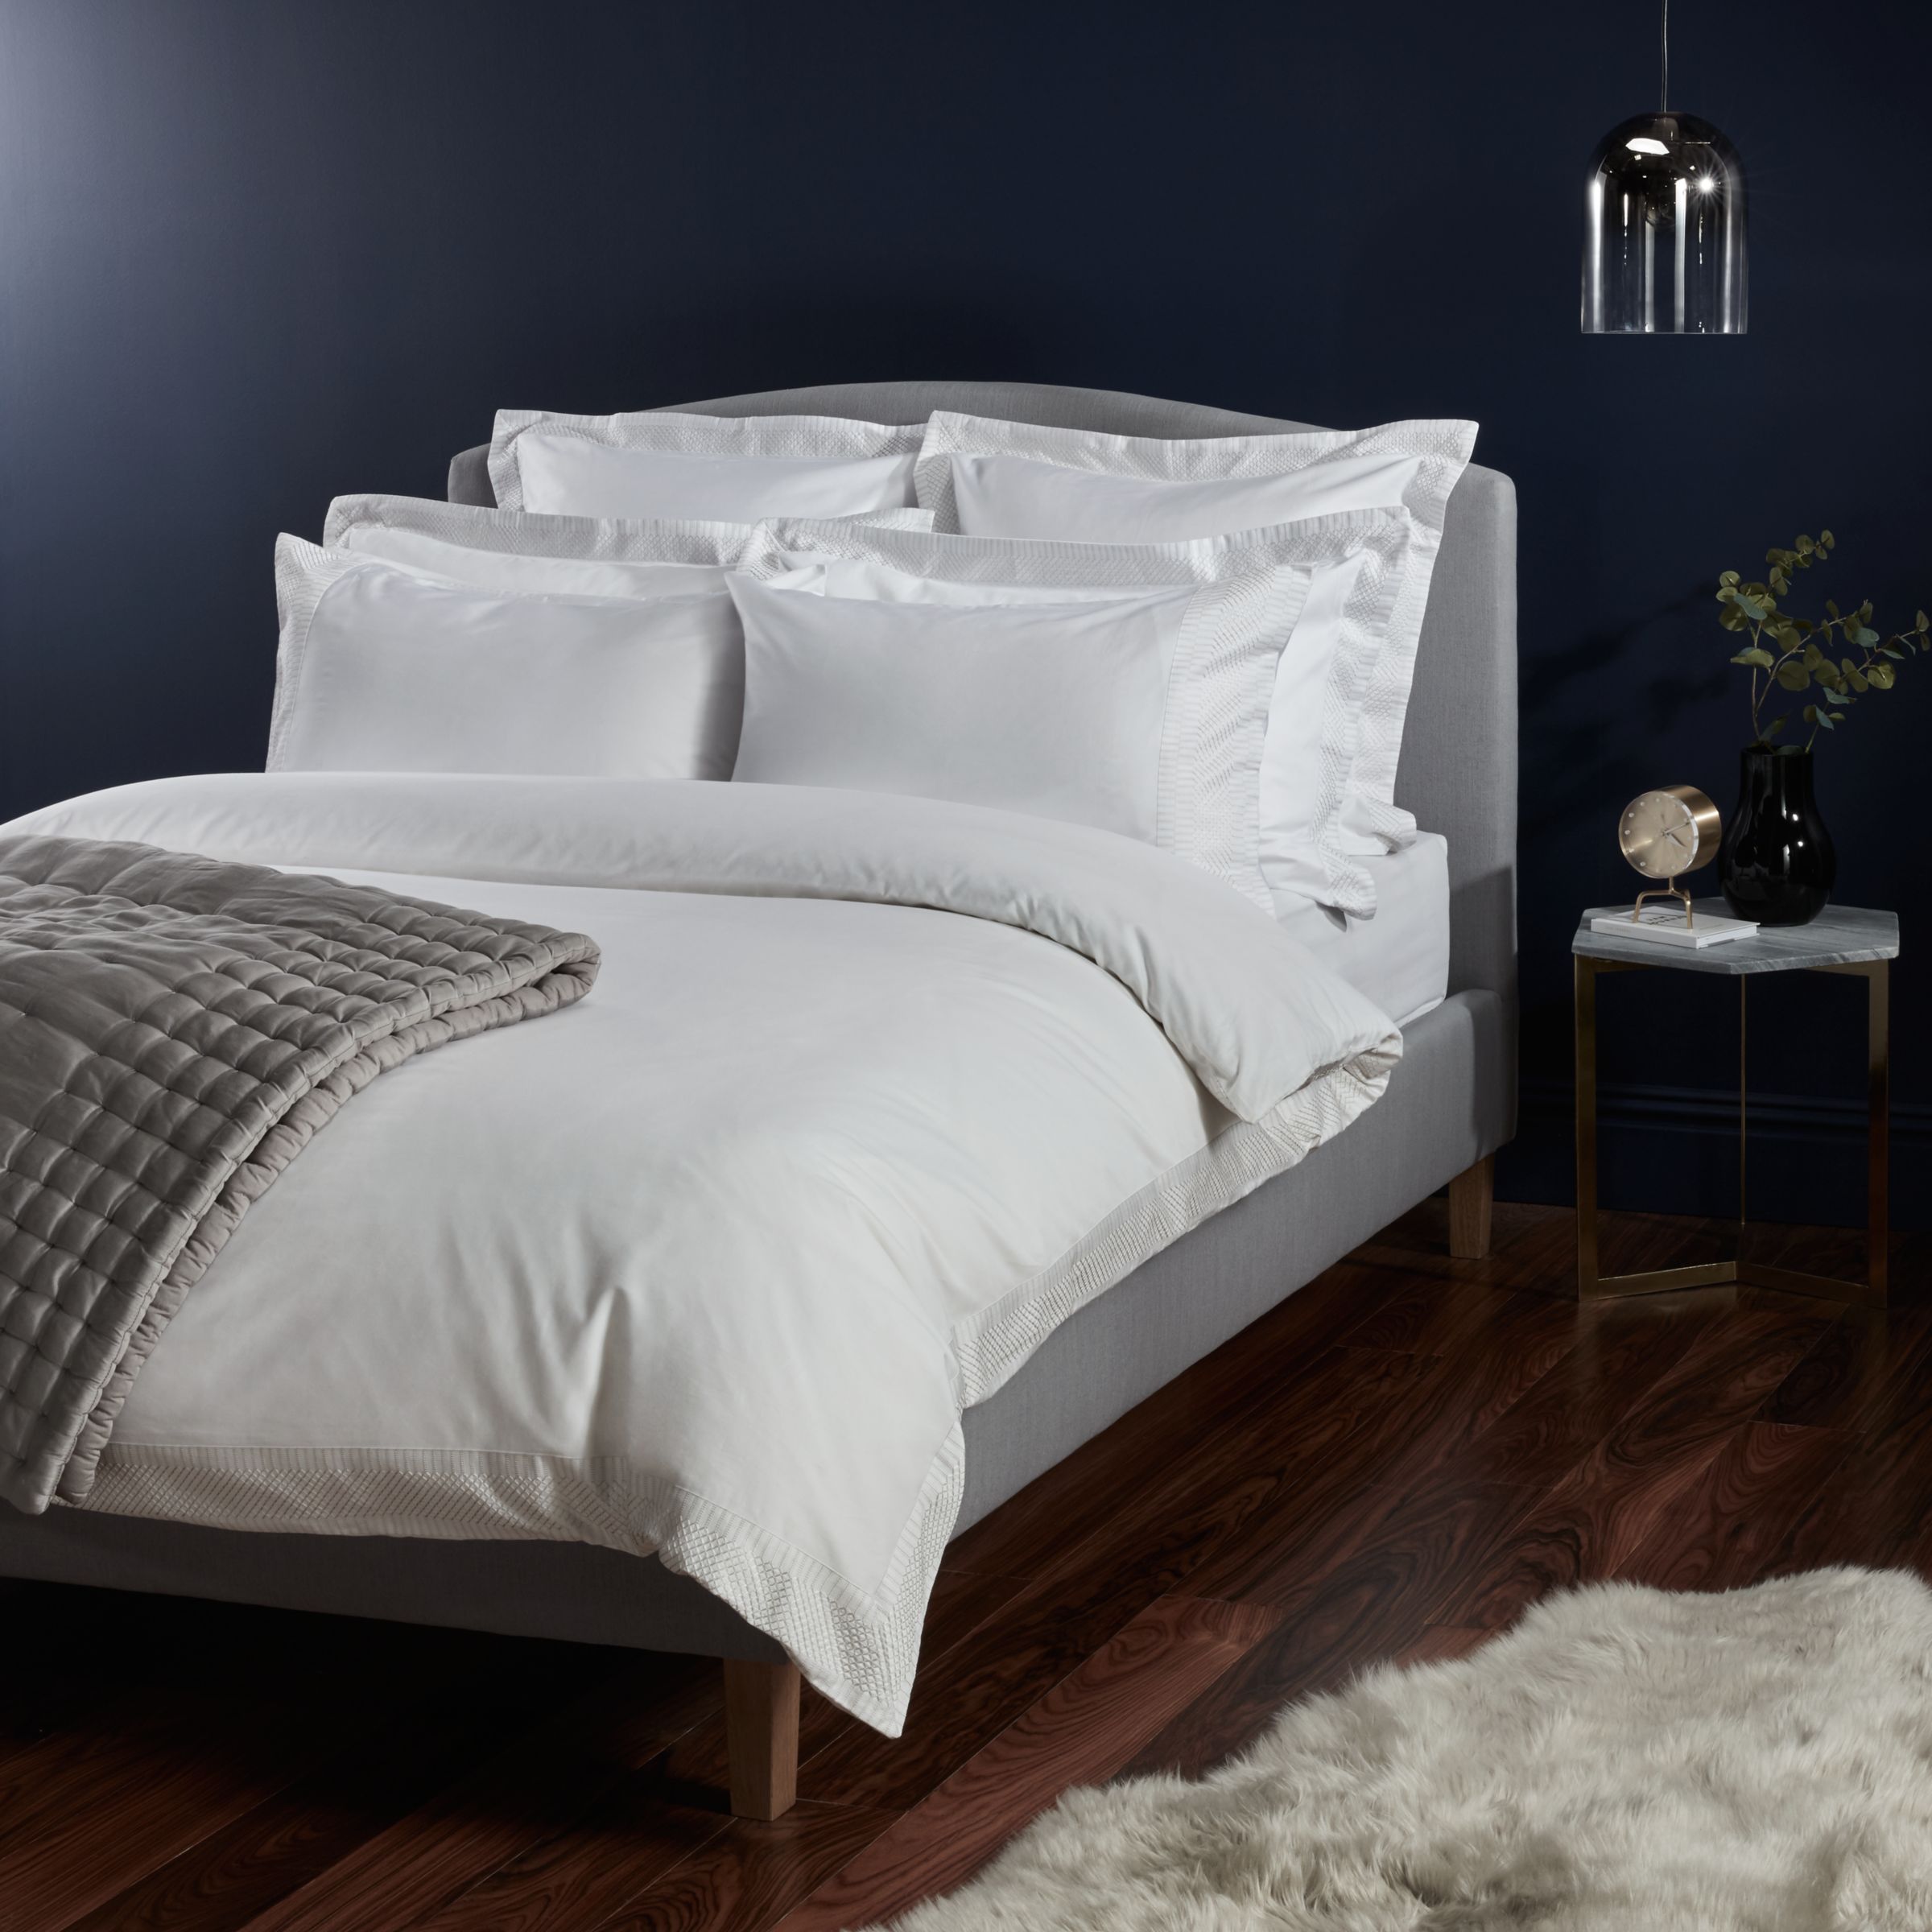 John Lewis & Partners Soft and Silky Treviso Cotton Duvet Covers and Pillowcases, White/Grey